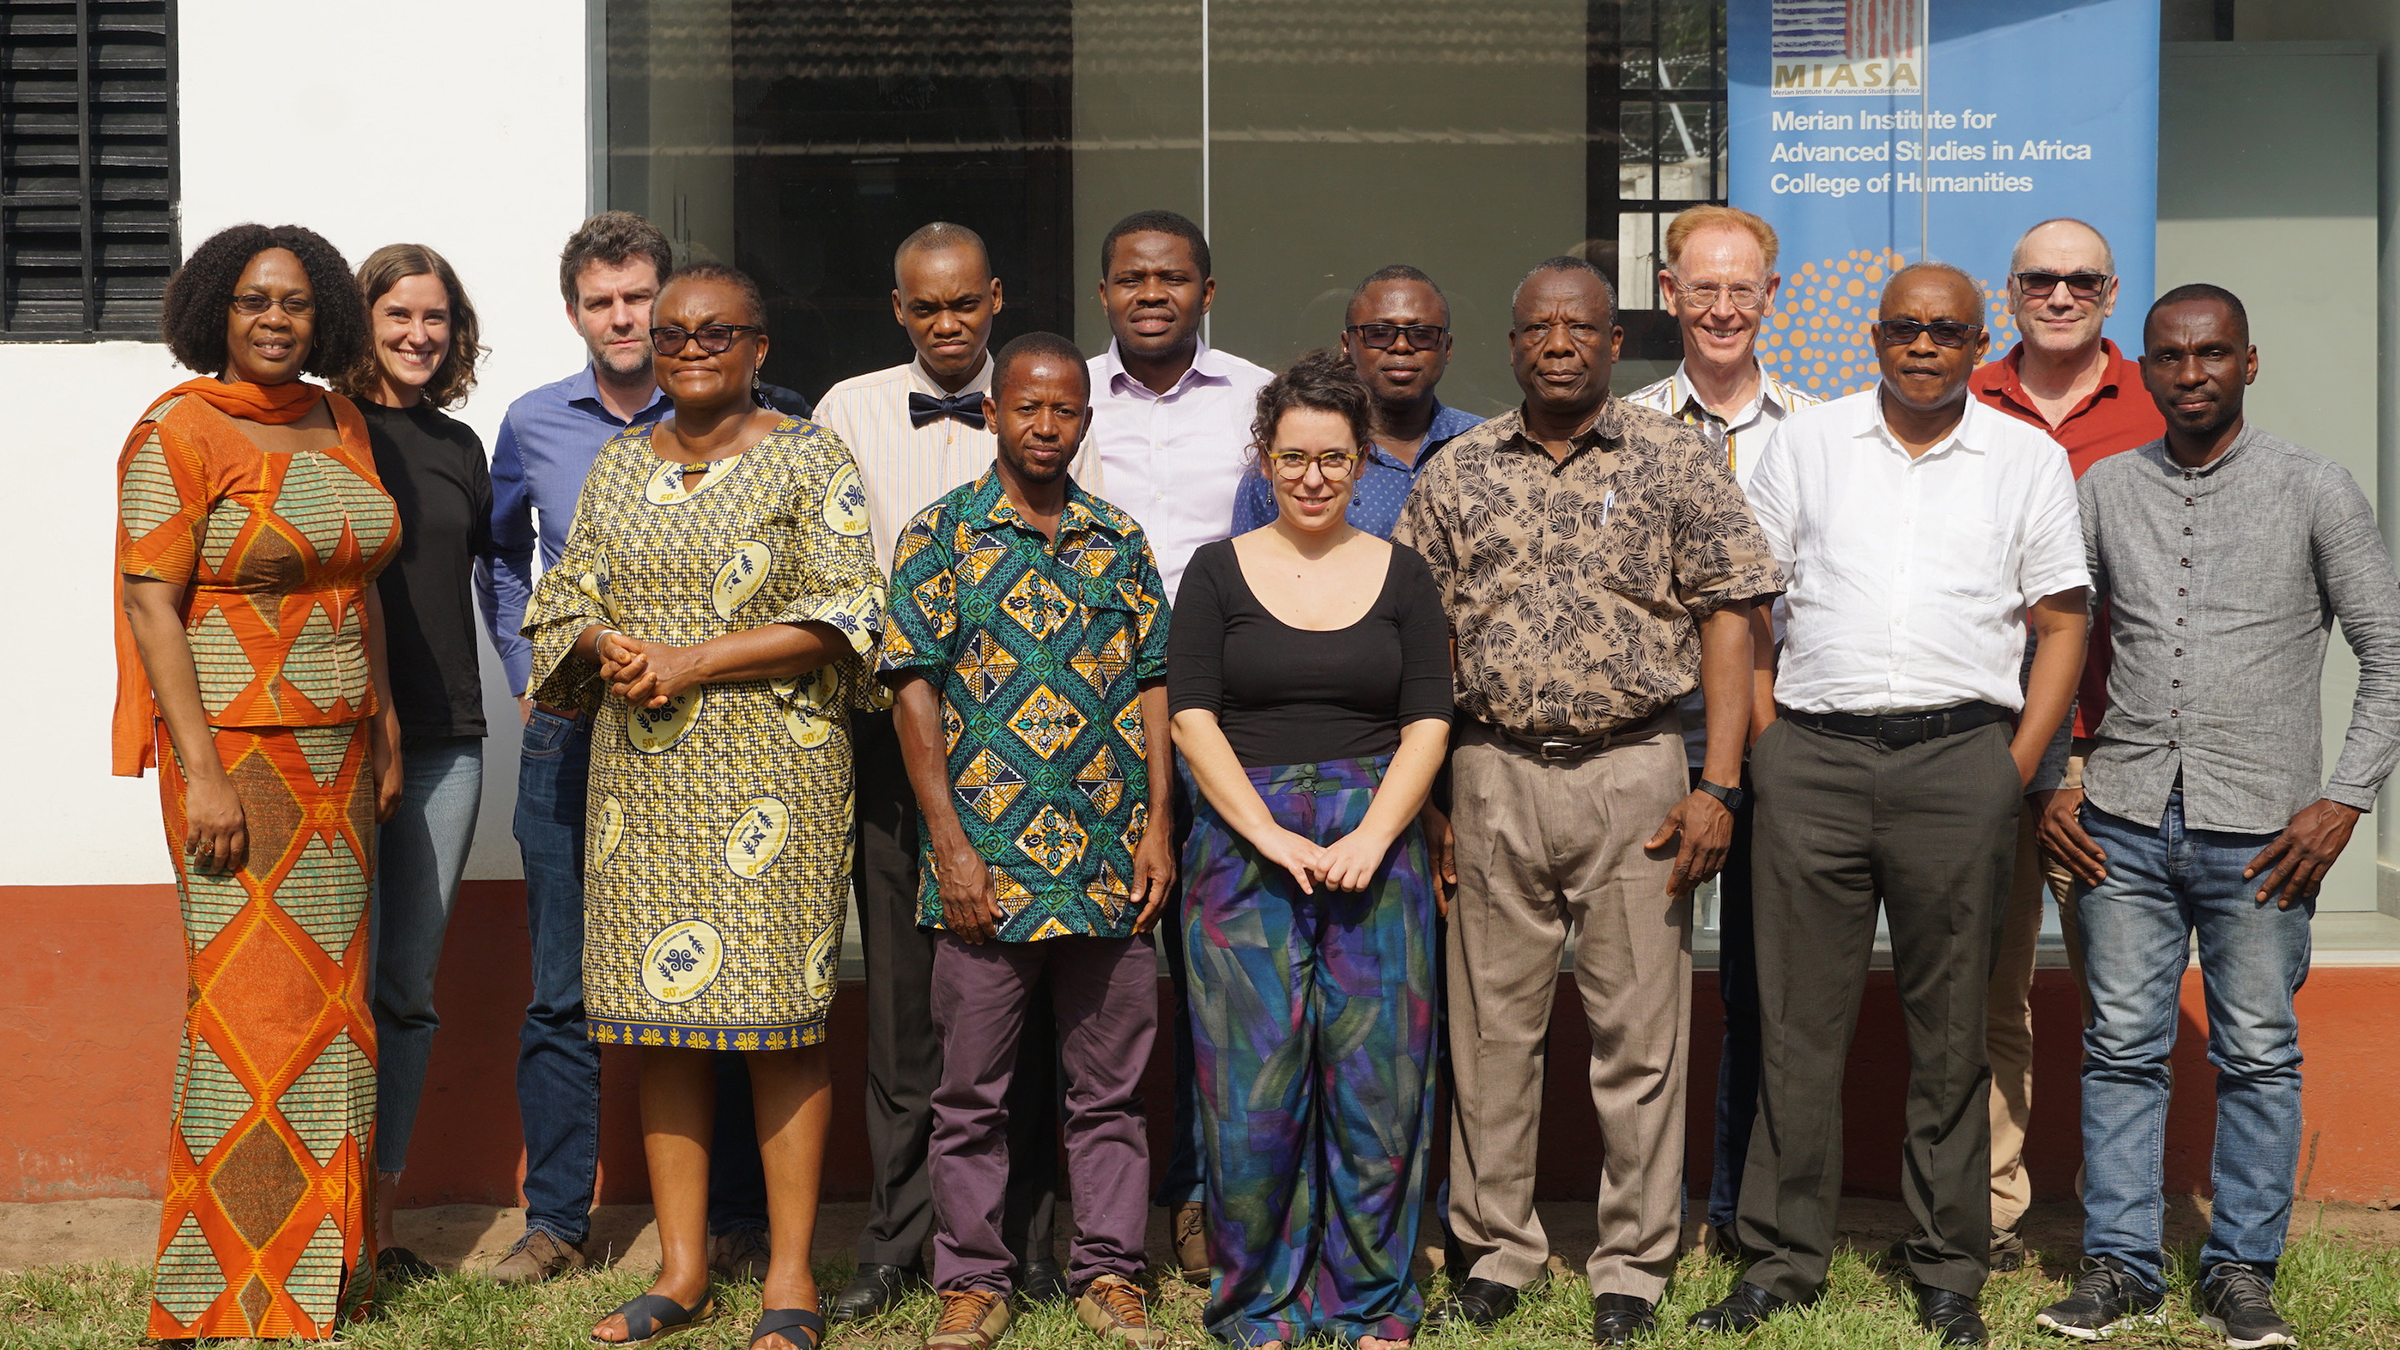 Participants of the conference "Sustainable Rural Transformation in Africa"